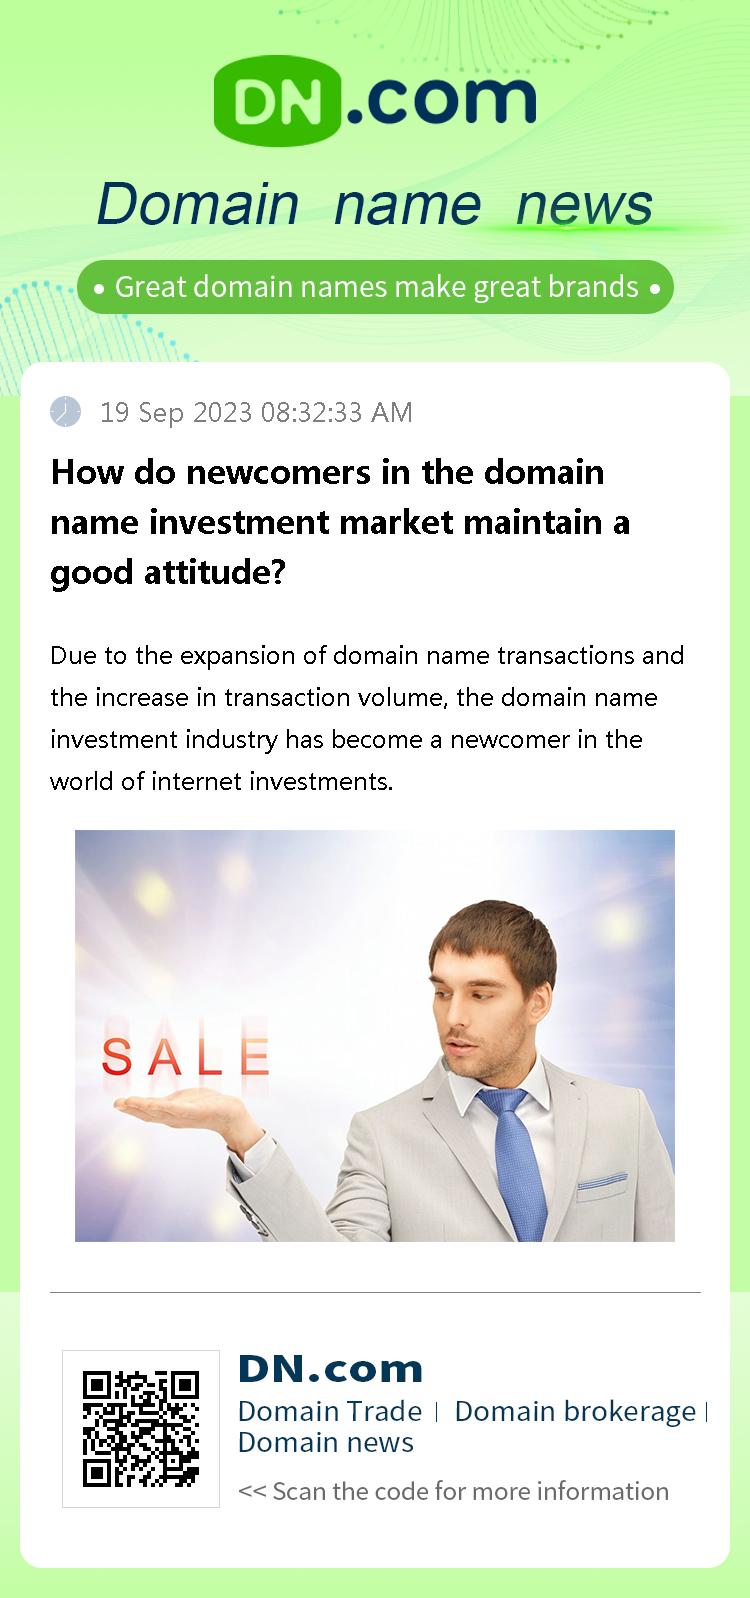 How do newcomers in the domain name investment market maintain a good attitude?